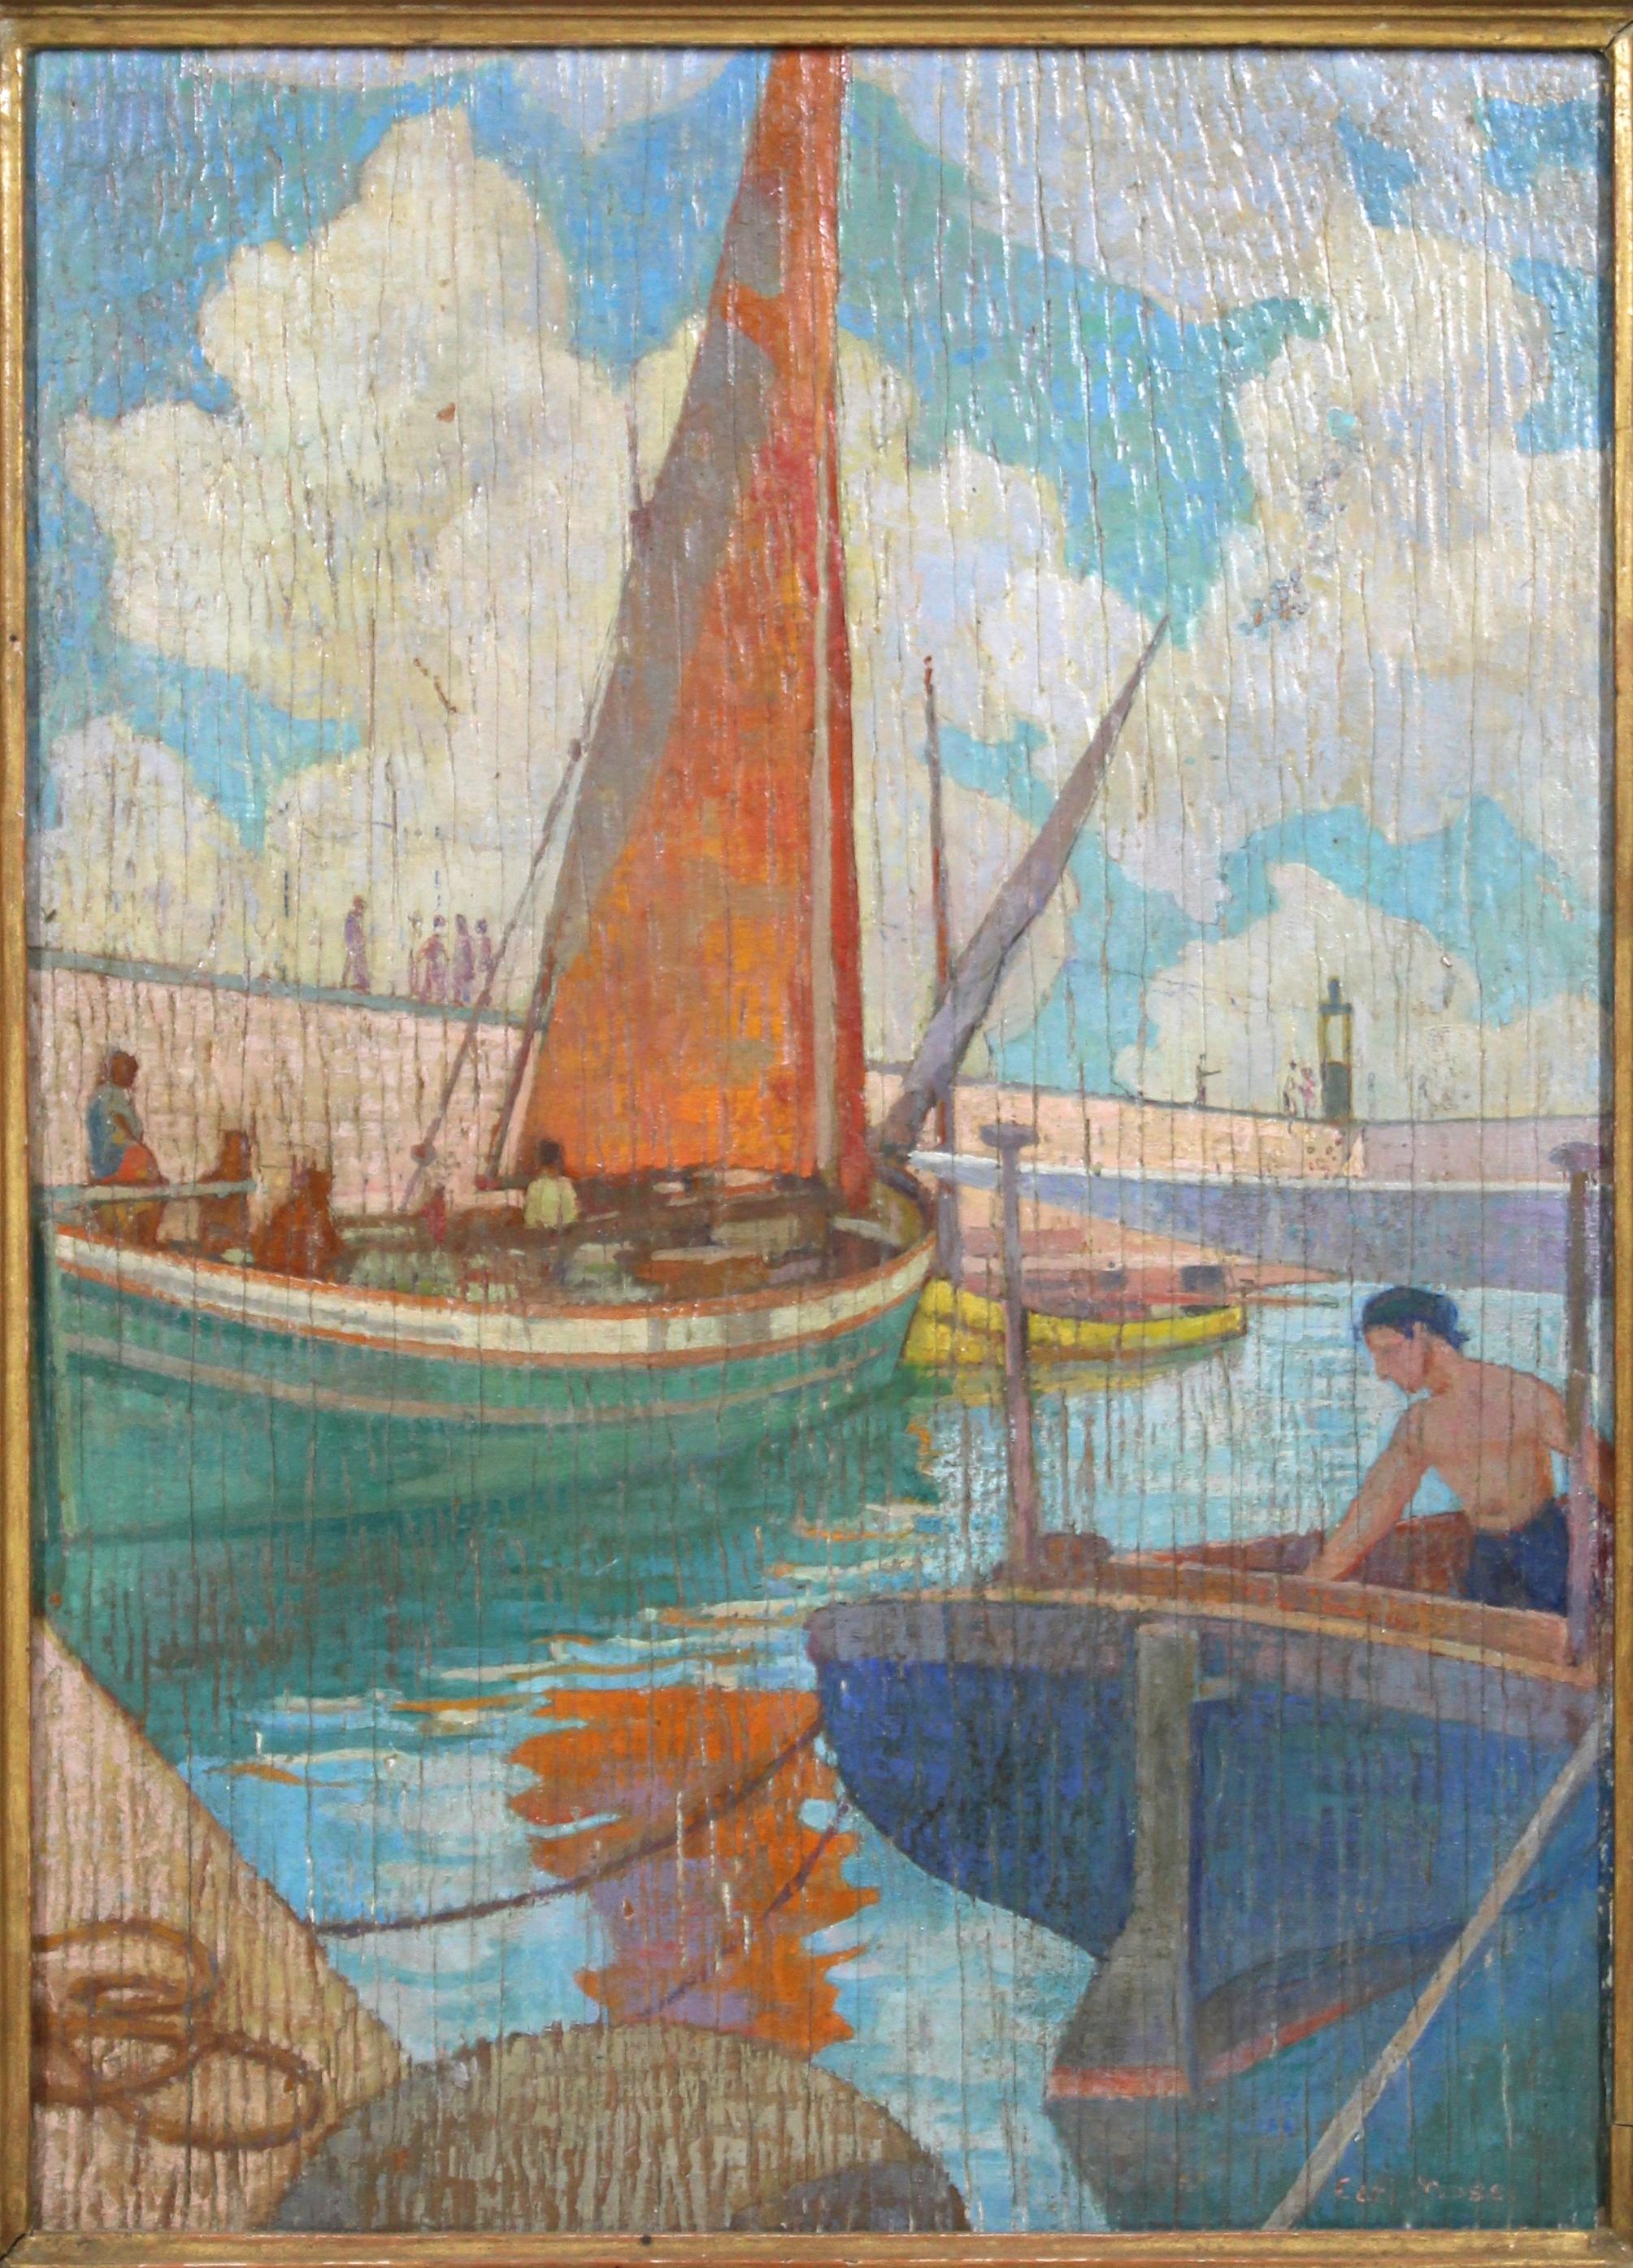 Austrian early Modernist oil on wood panel painting by Austrian painter and graphic artist Carl Moser (1873-1939). The piece depicts a port scene with sailing boats and was made in the 1900s. Signed in the lower right corner. In great antique